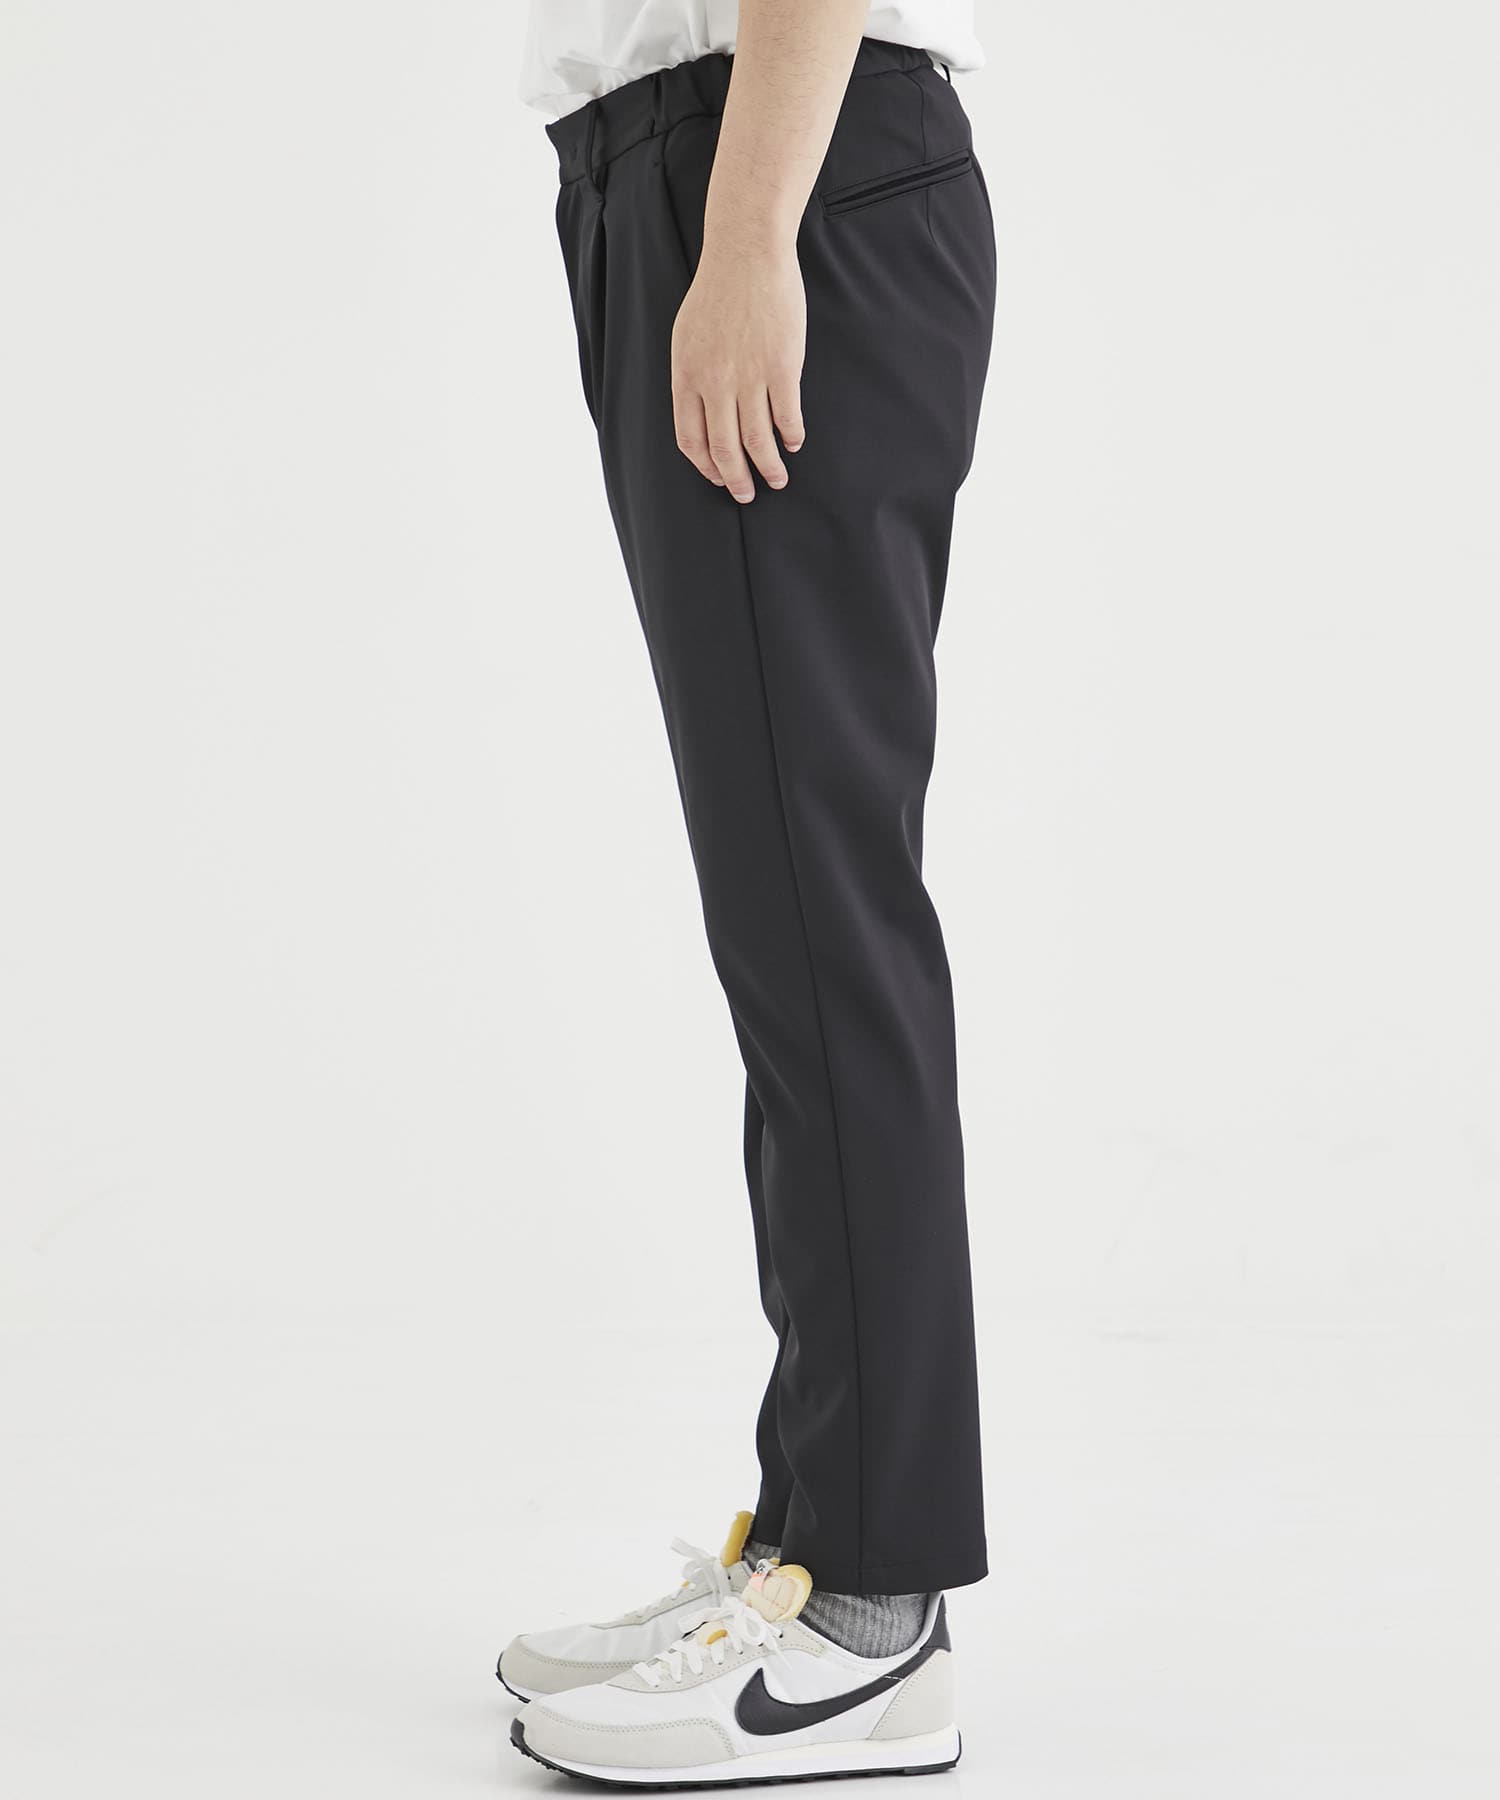 Washable High Function Jersey Tapered Pants(44 BLACK): THE TOKYO